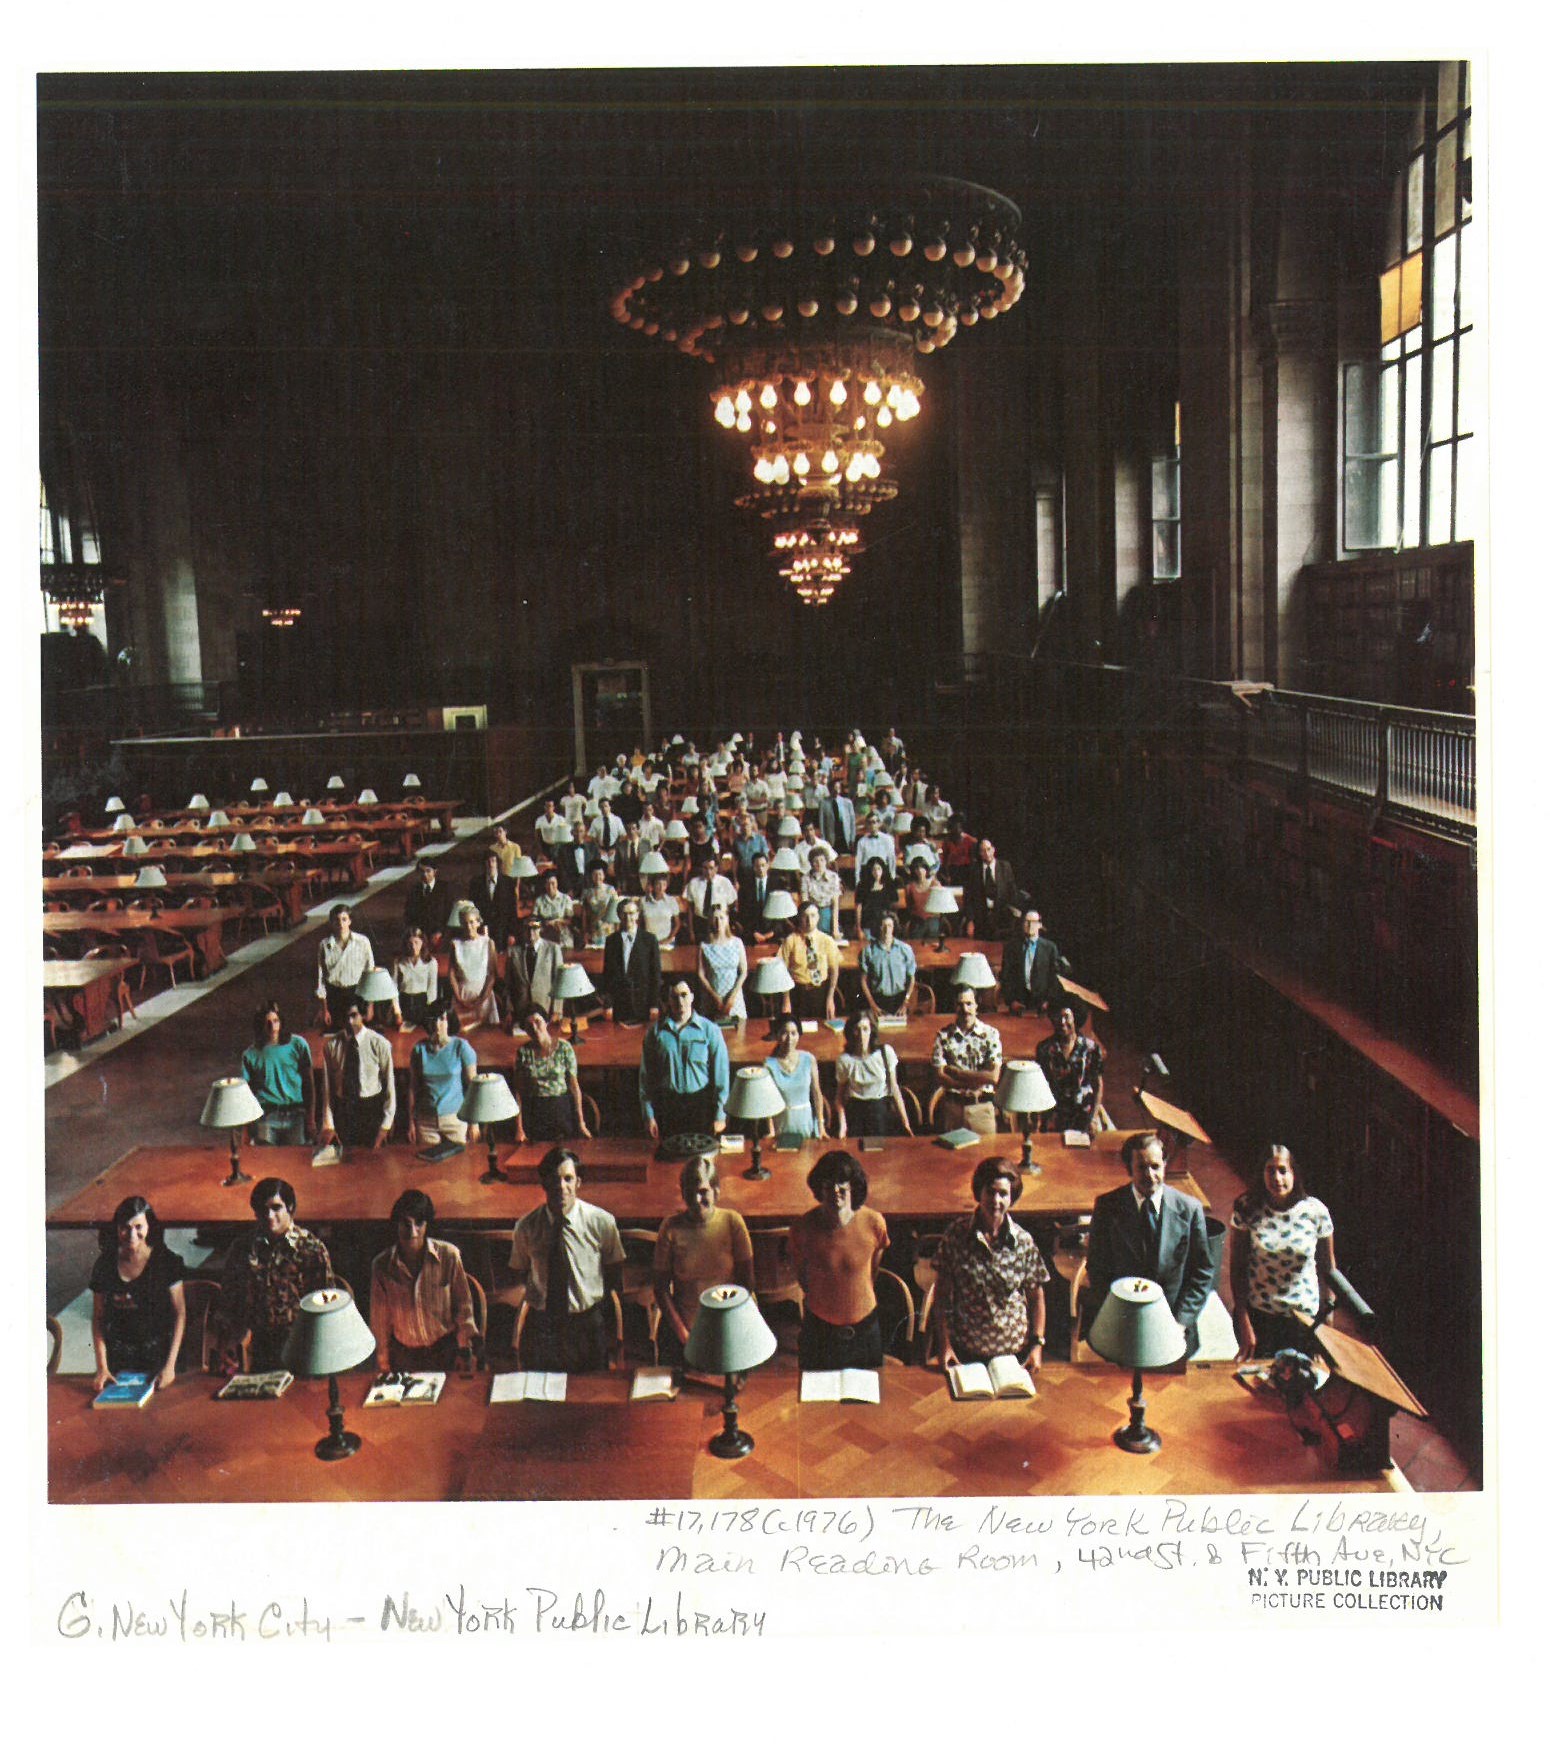 a group of people sitting at tables in a large room